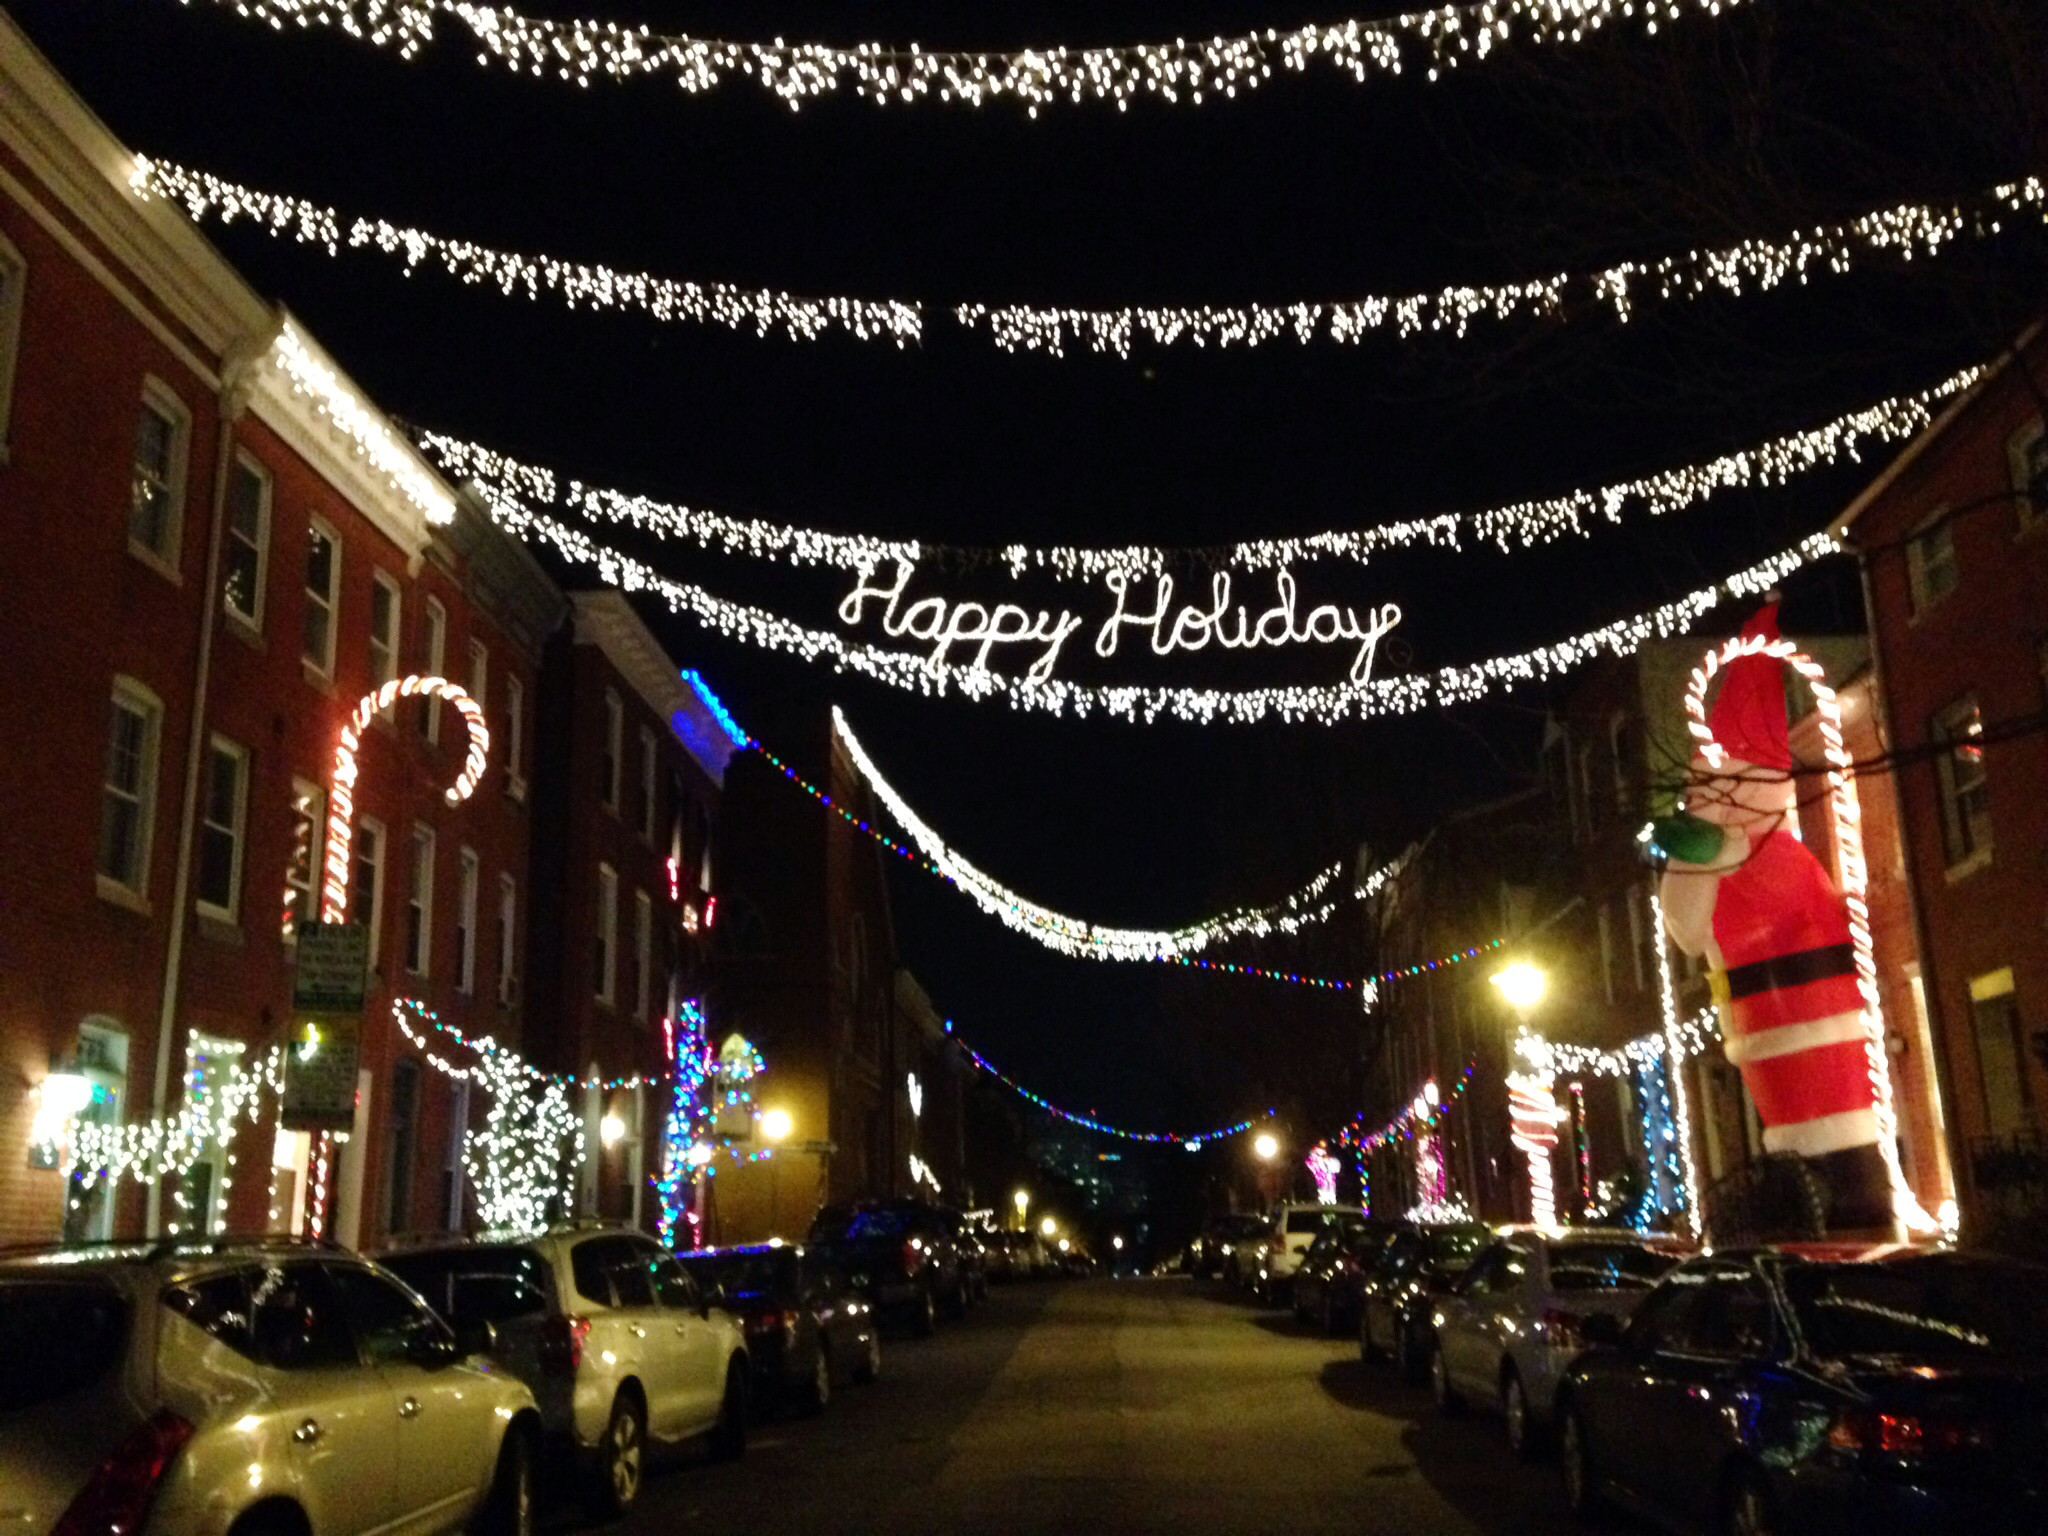 A festive holiday guide to the Christmas lights adorning the charming streets of Federal Hill in Baltimore, where parked cars add to the picturesque scenery.